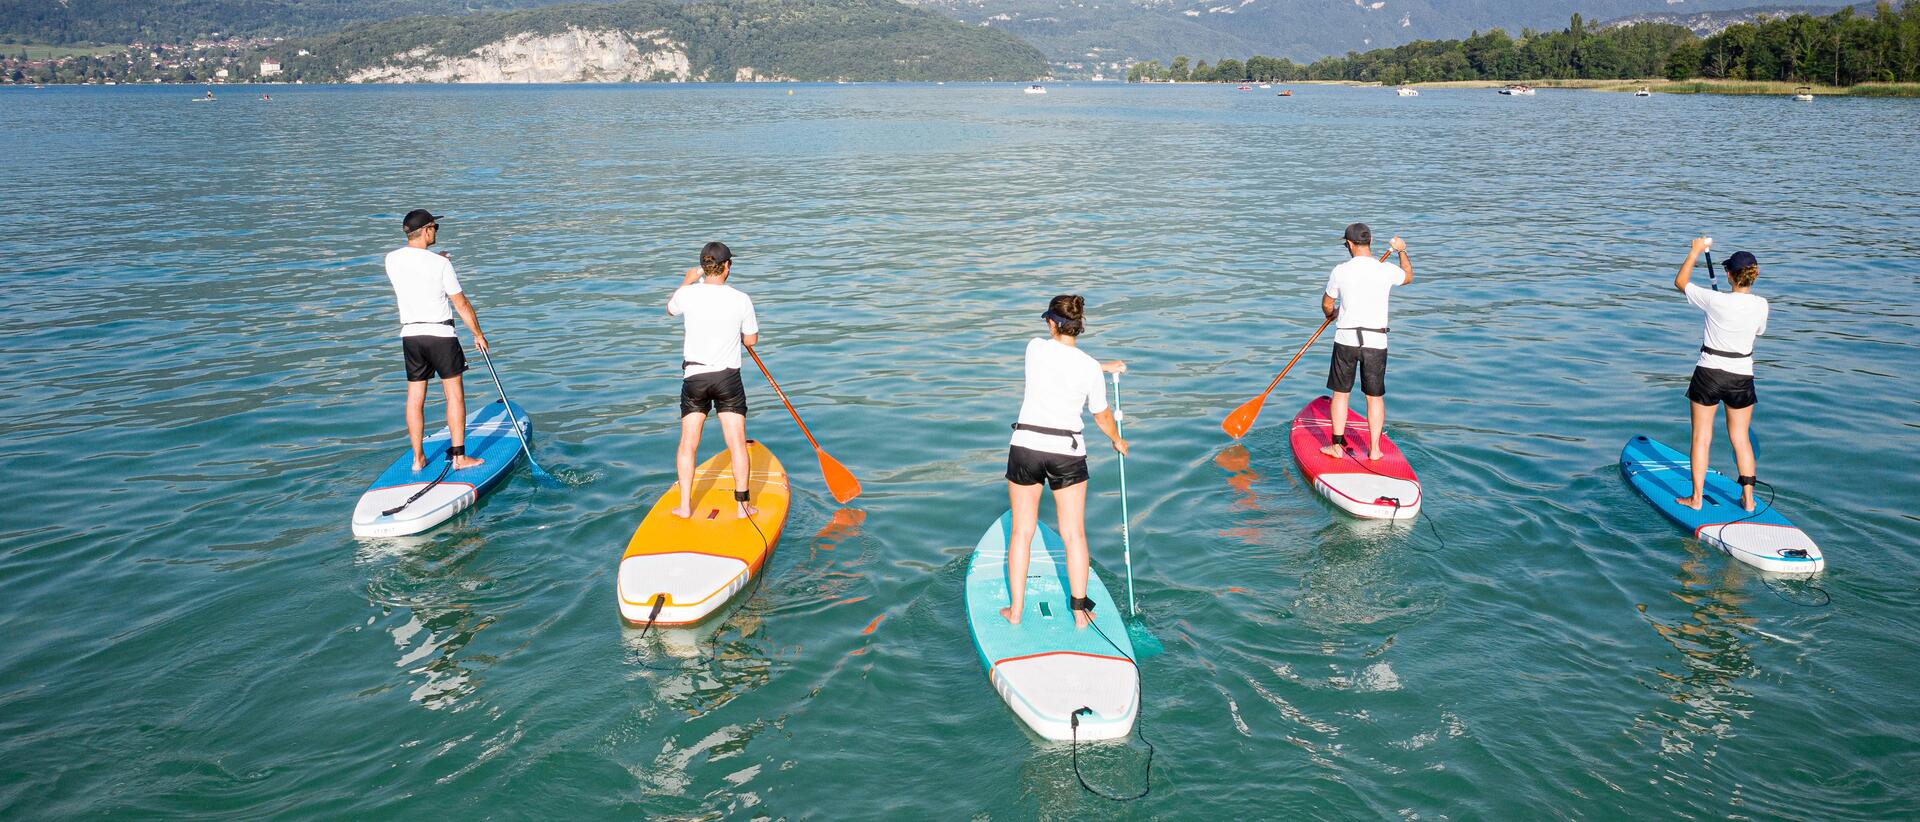 A group of people paddling on Stand up paddle boards of different colors.